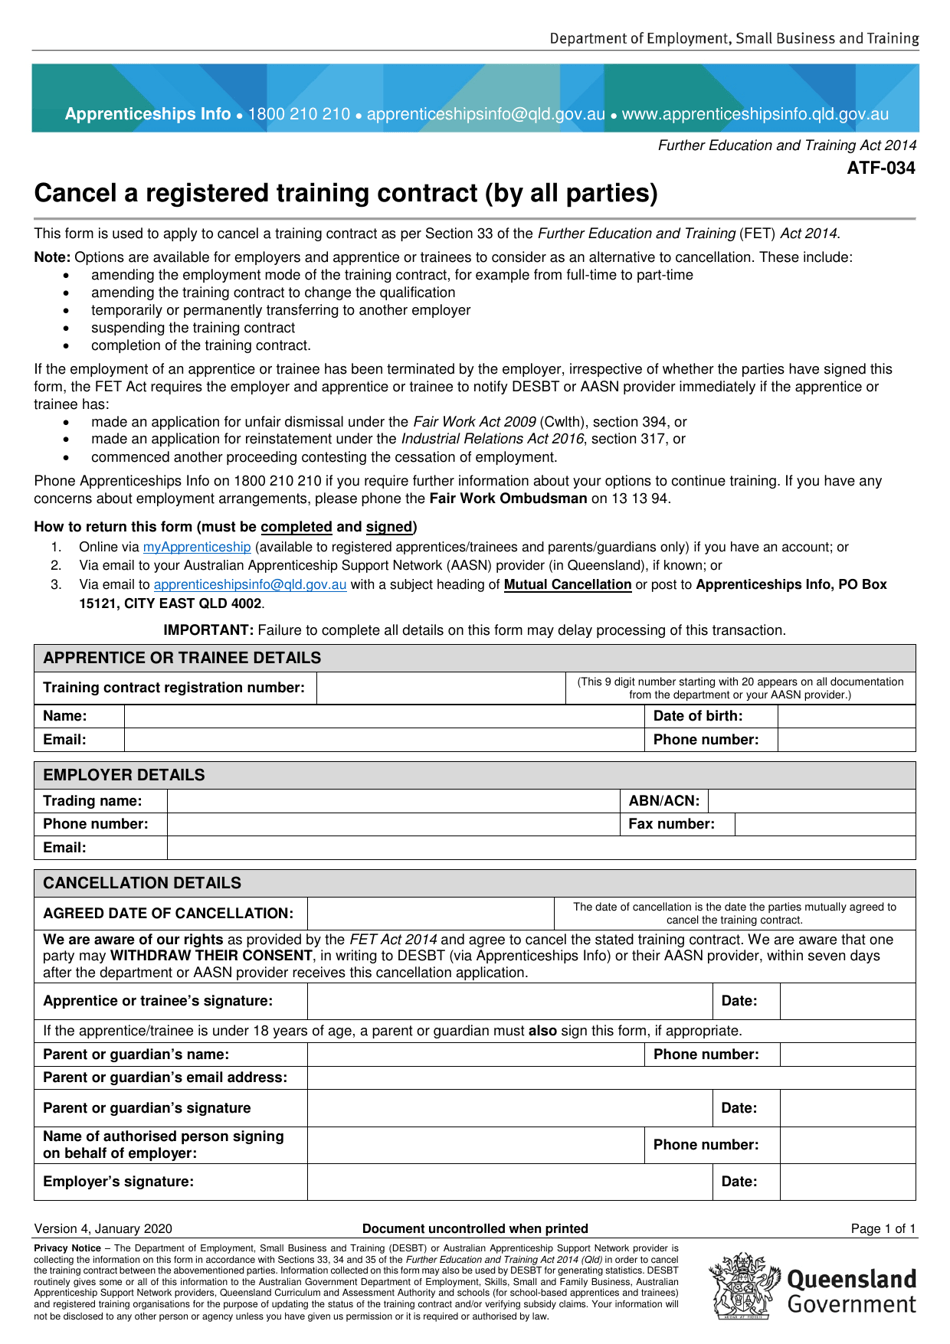 Form ATF-034 Cancel a Registered Training Contract (By All Parties) - Queensland, Australia, Page 1